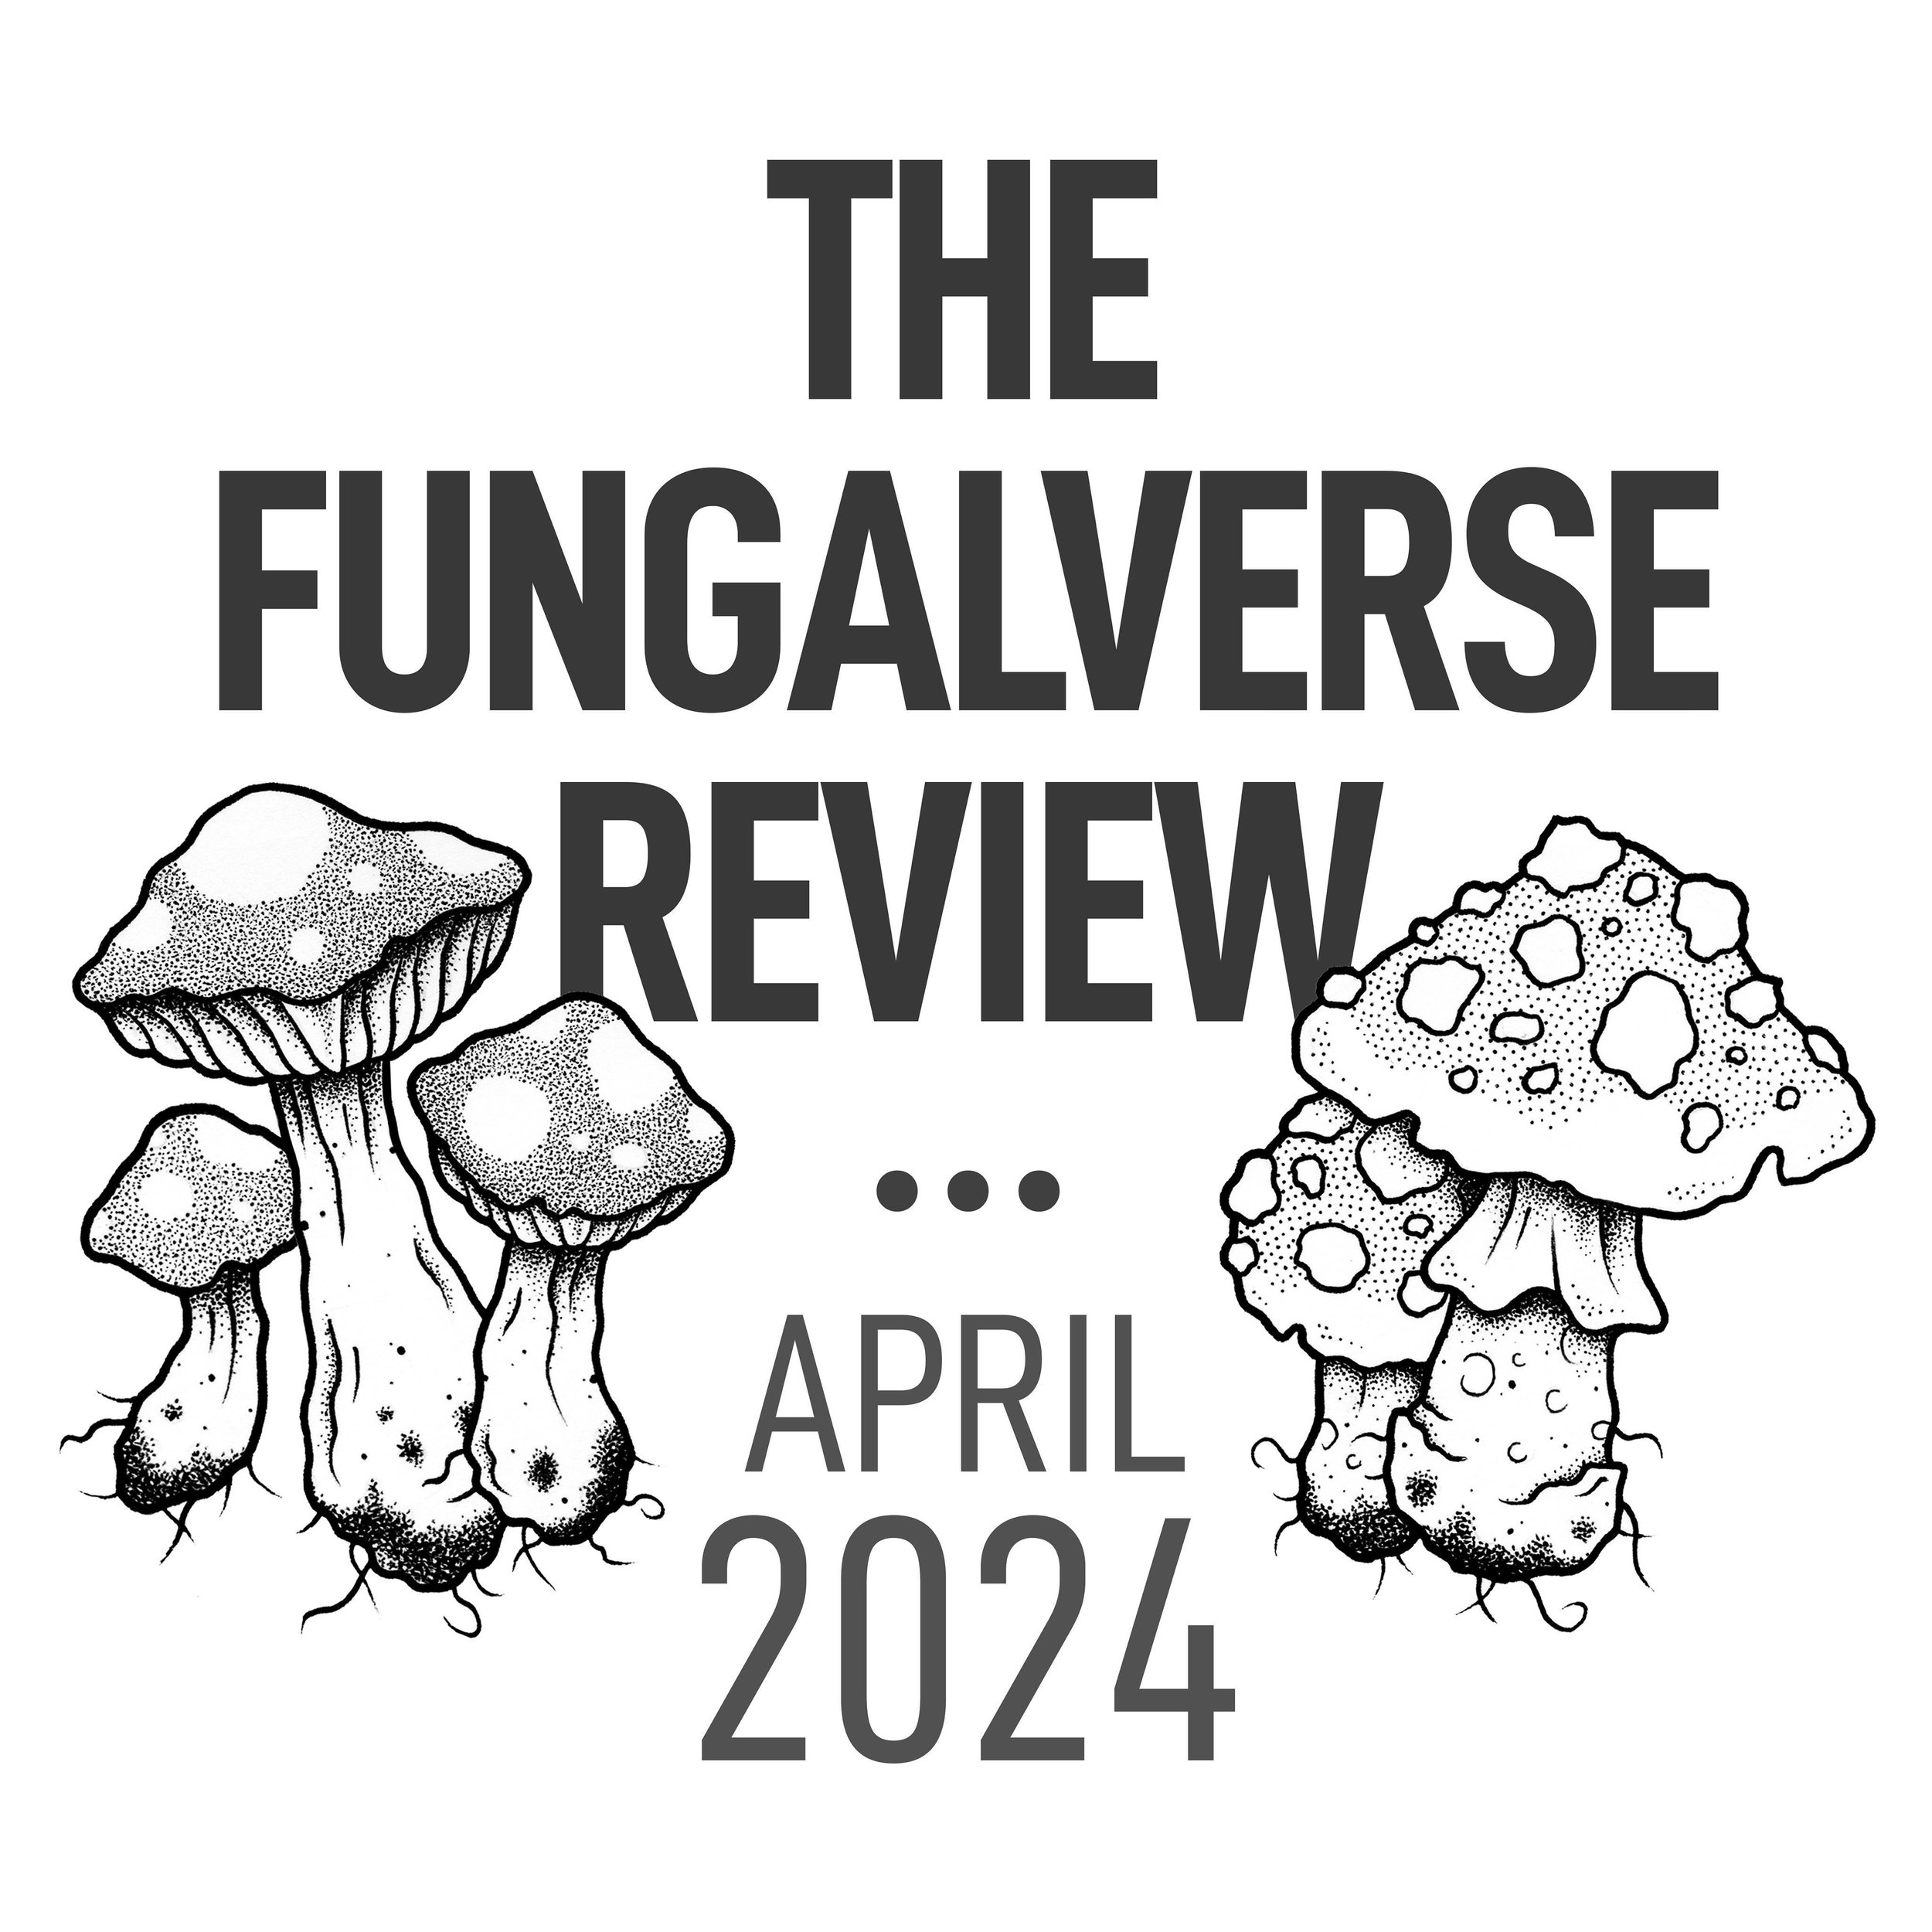 🍄 The April edition of THE FUNGALVERSE REVIEW newsletter is here 🍄

This month, I chat about #MushroomBlues post-launch and sales, my creative detox, new @sffaddictspod episodes, artist/book recs (Samuel Parker &amp; @the_fools_tale) and more. 

SI